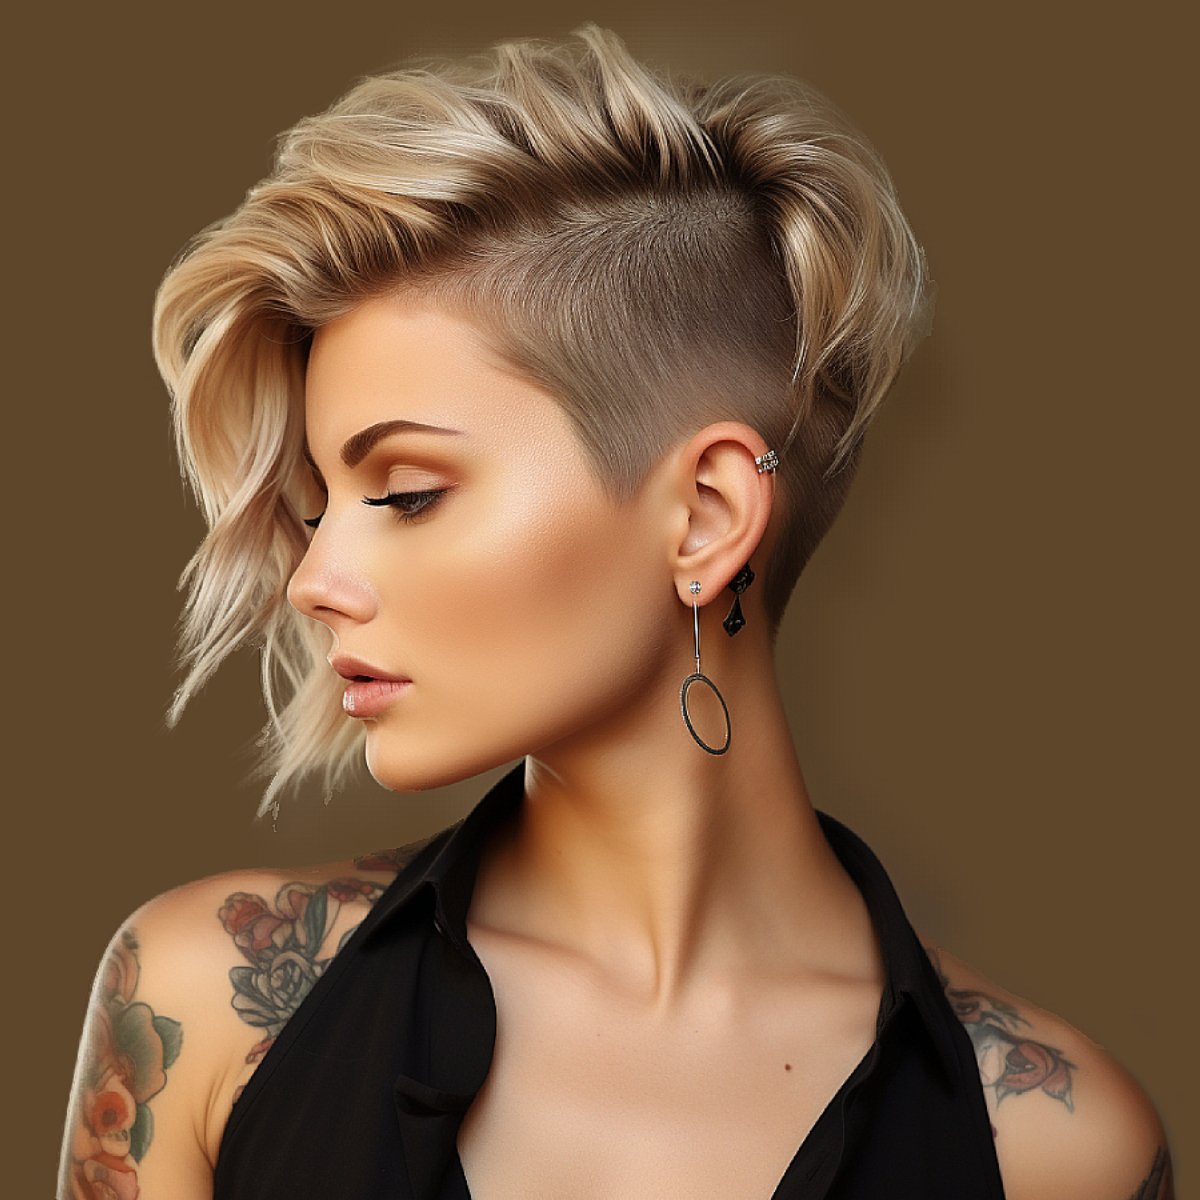 Female Fade Hair 2023 - You will become another woman